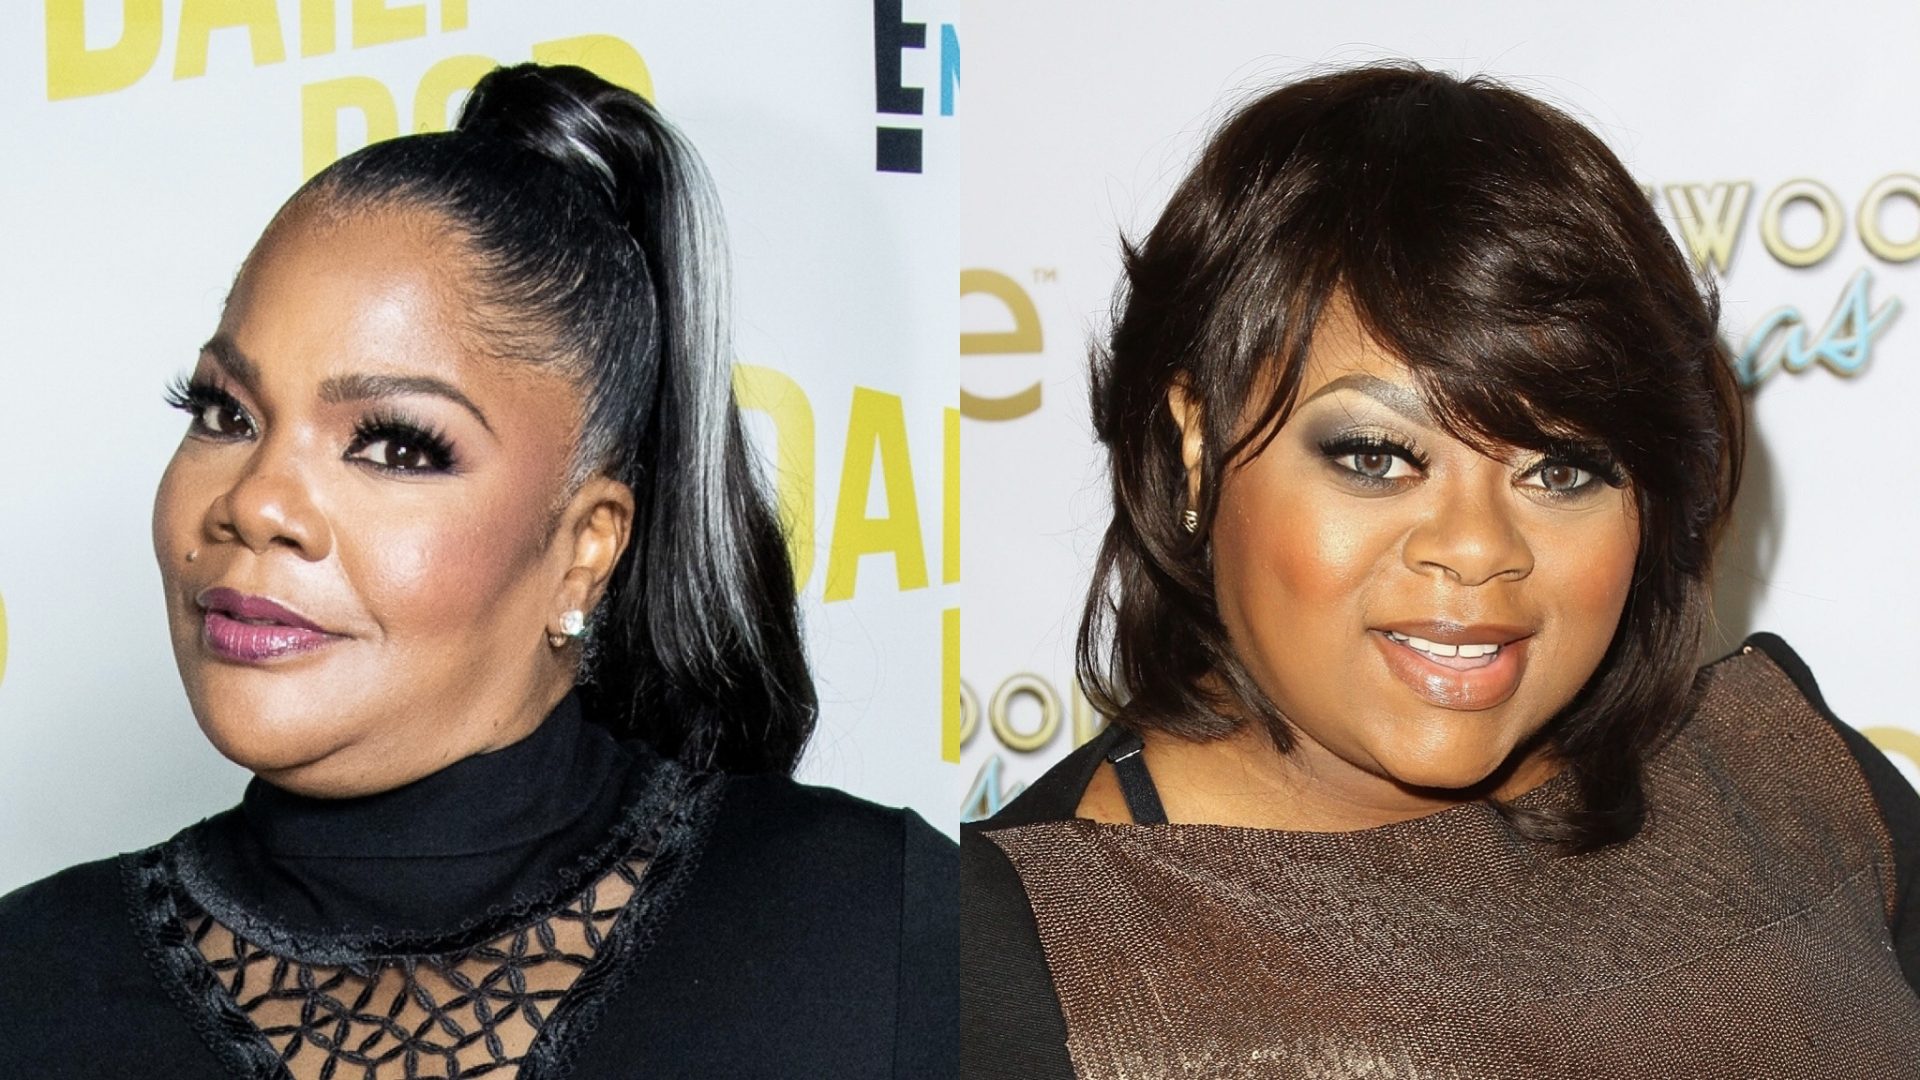 WATCH: Mo'Nique Calls On CBS To Fairly Compensate Her & Countess Vaughn For Their Time On 'The Parkers'